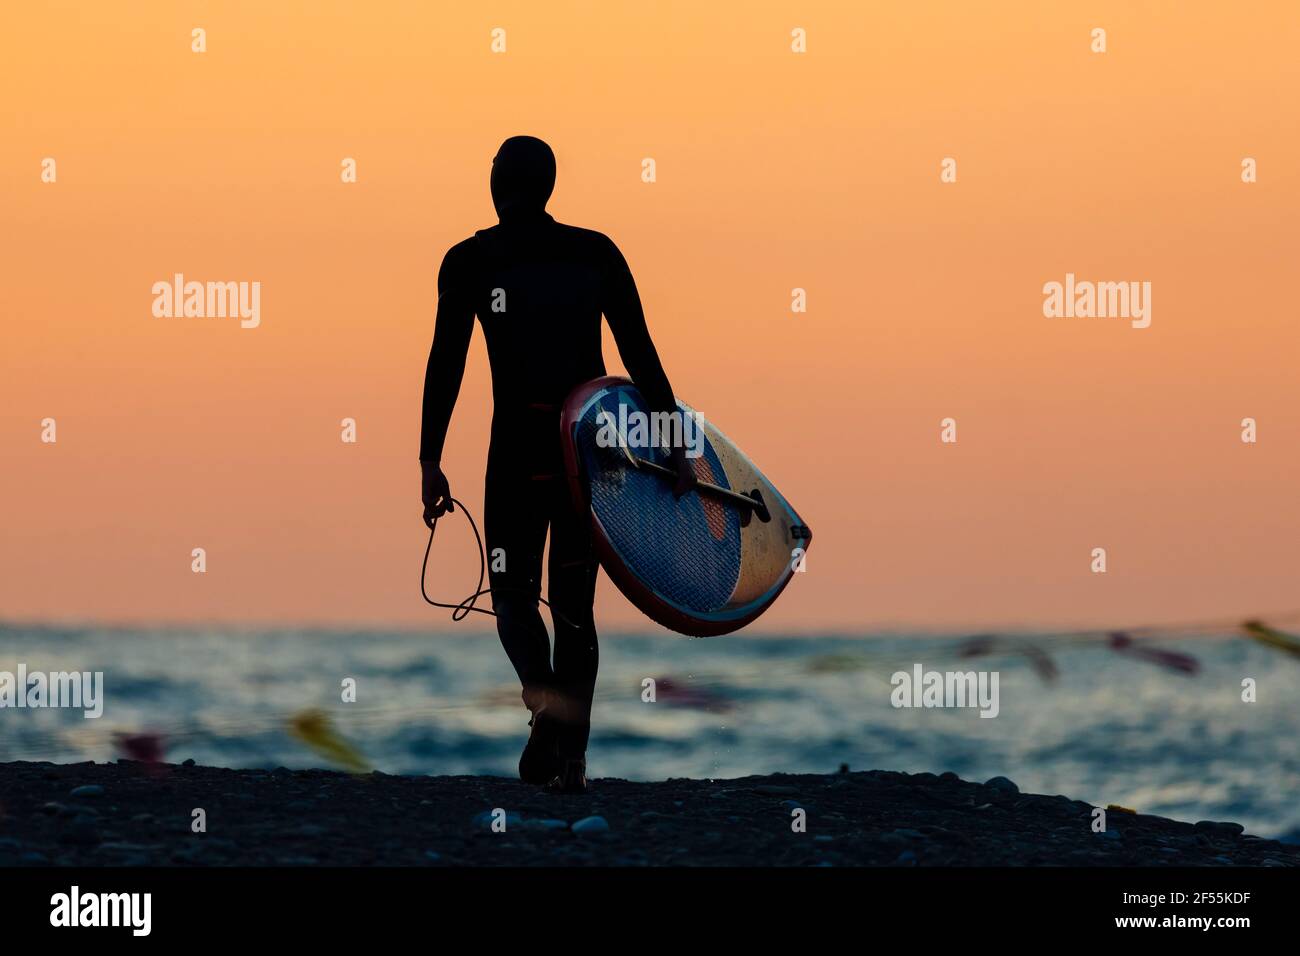 Silhouette of male surfer walking against moody sky at dusk with surfboard in hand Stock Photo